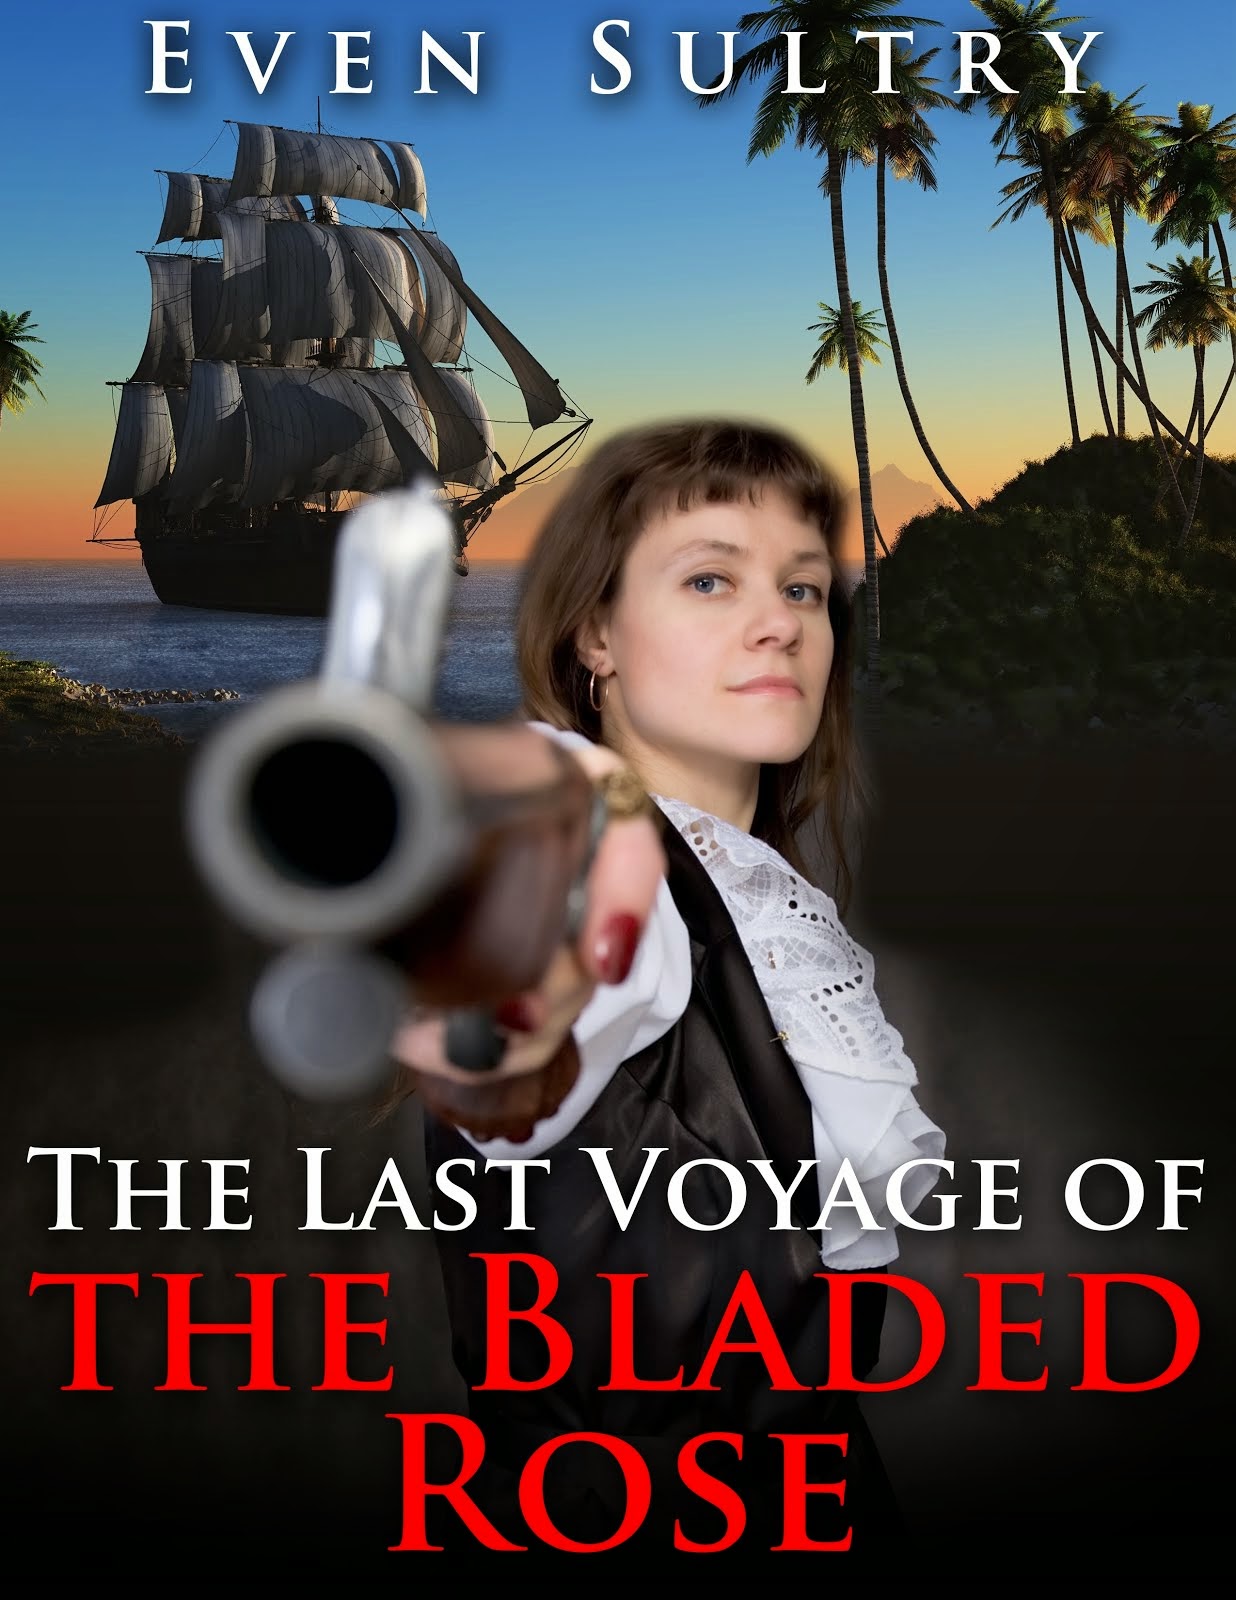 The Last Voyage of the Bladed Rose